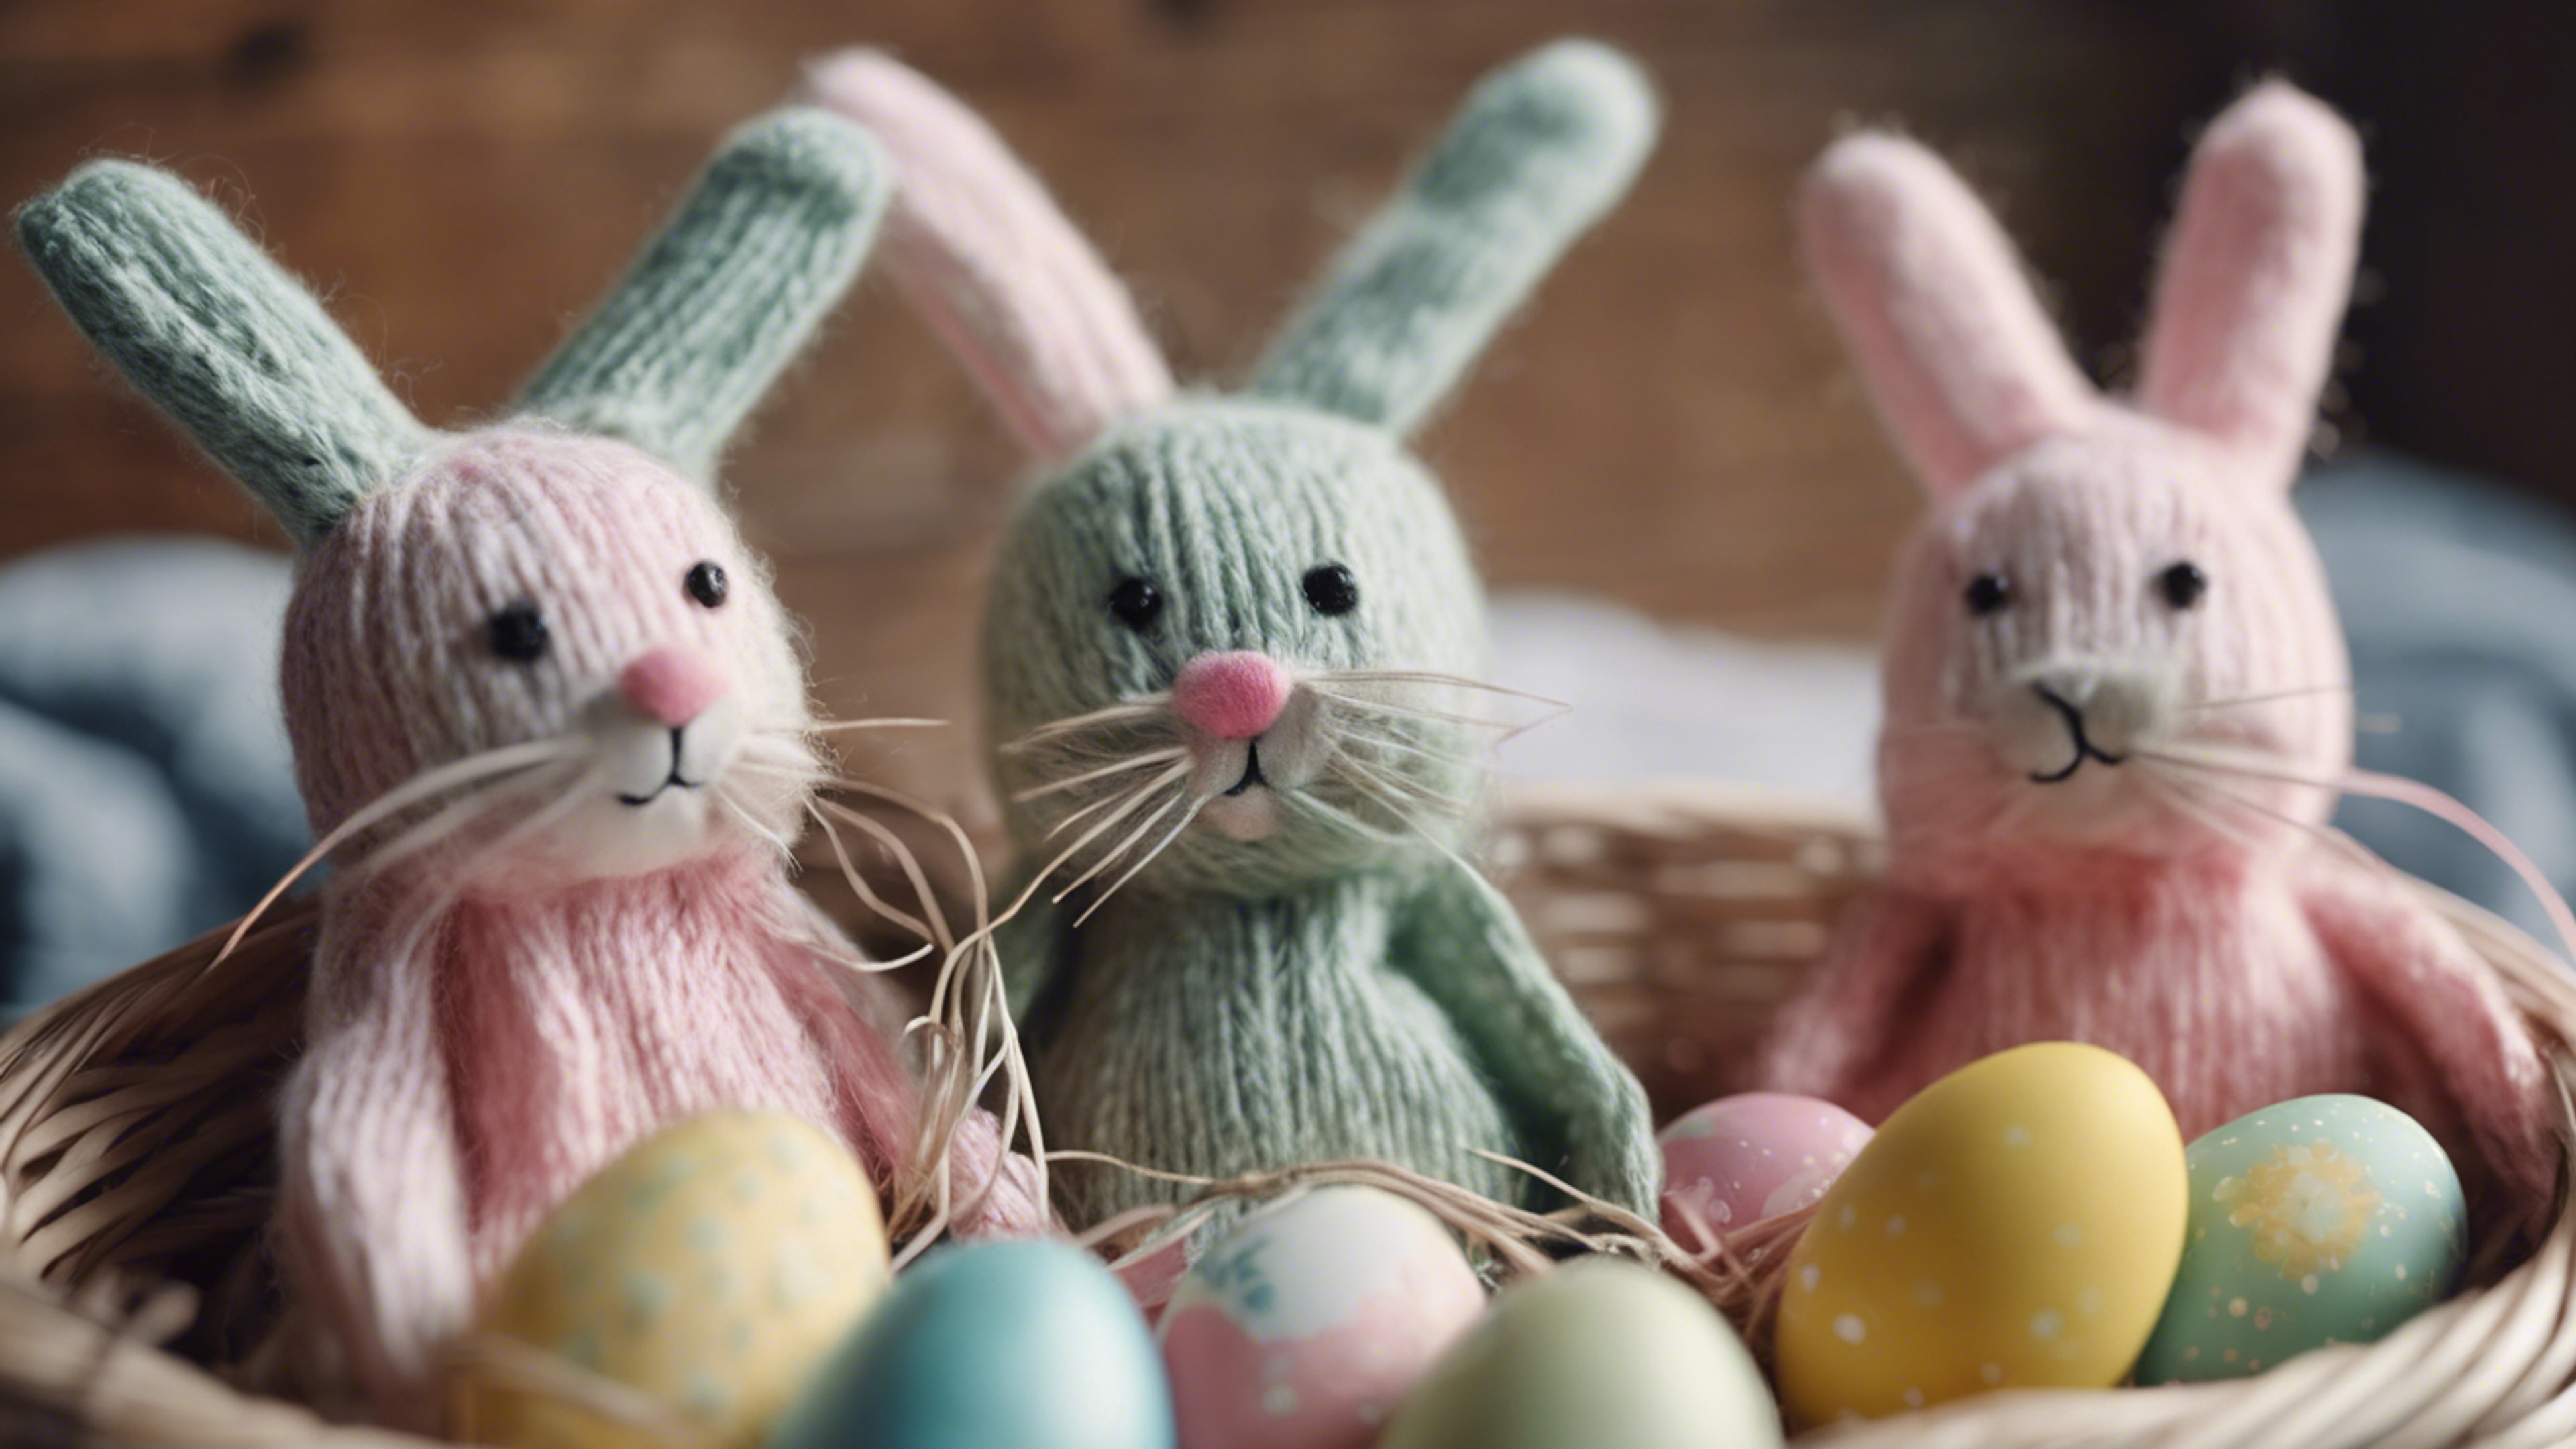 Homemade sock bunnies with twine whiskers, sitting in a cozy Easter basket. Wallpaper[6d67e9ac509f498599cb]